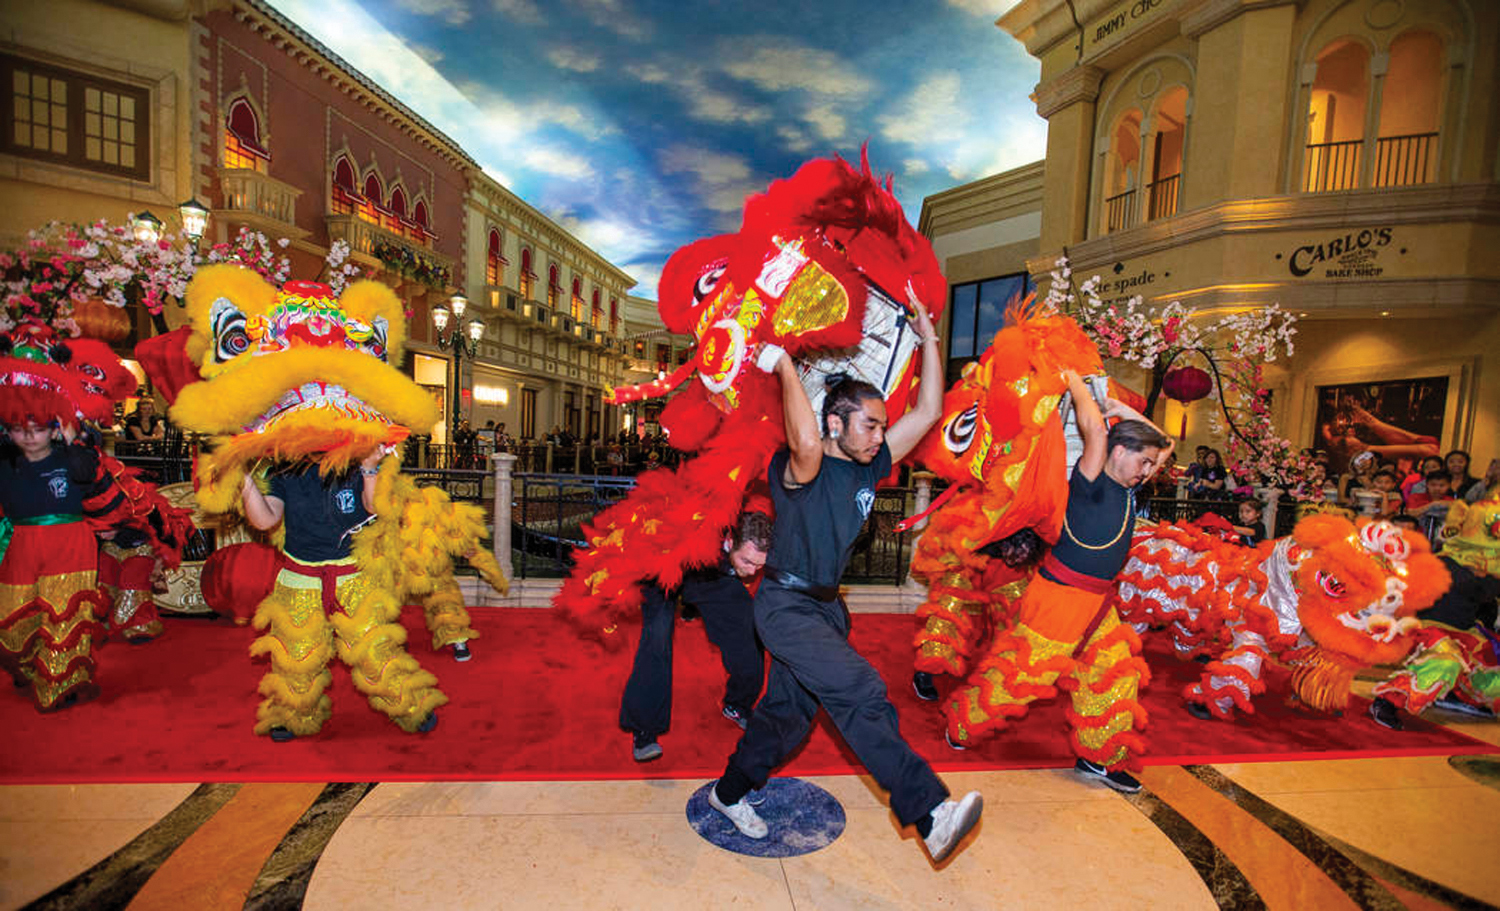 PHOTOS: Chinese New Year Celebrations in Las Vegas